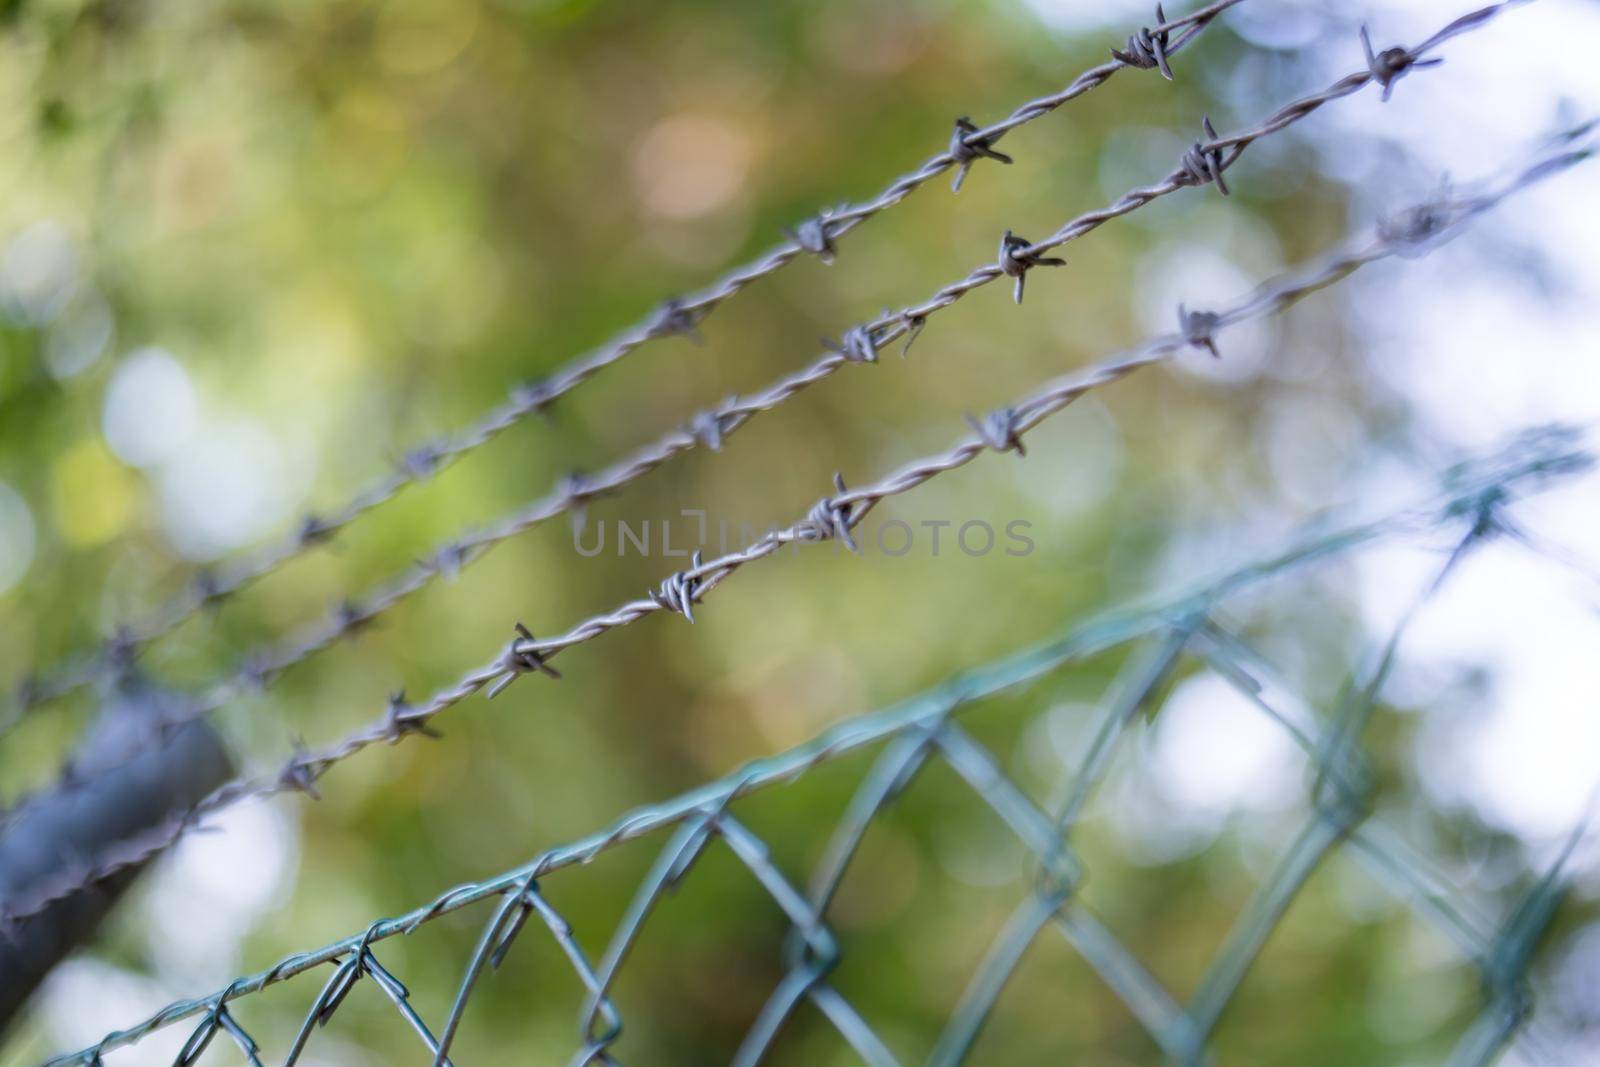 Lines of barbed wire to demarcate the border by Daxenbichler